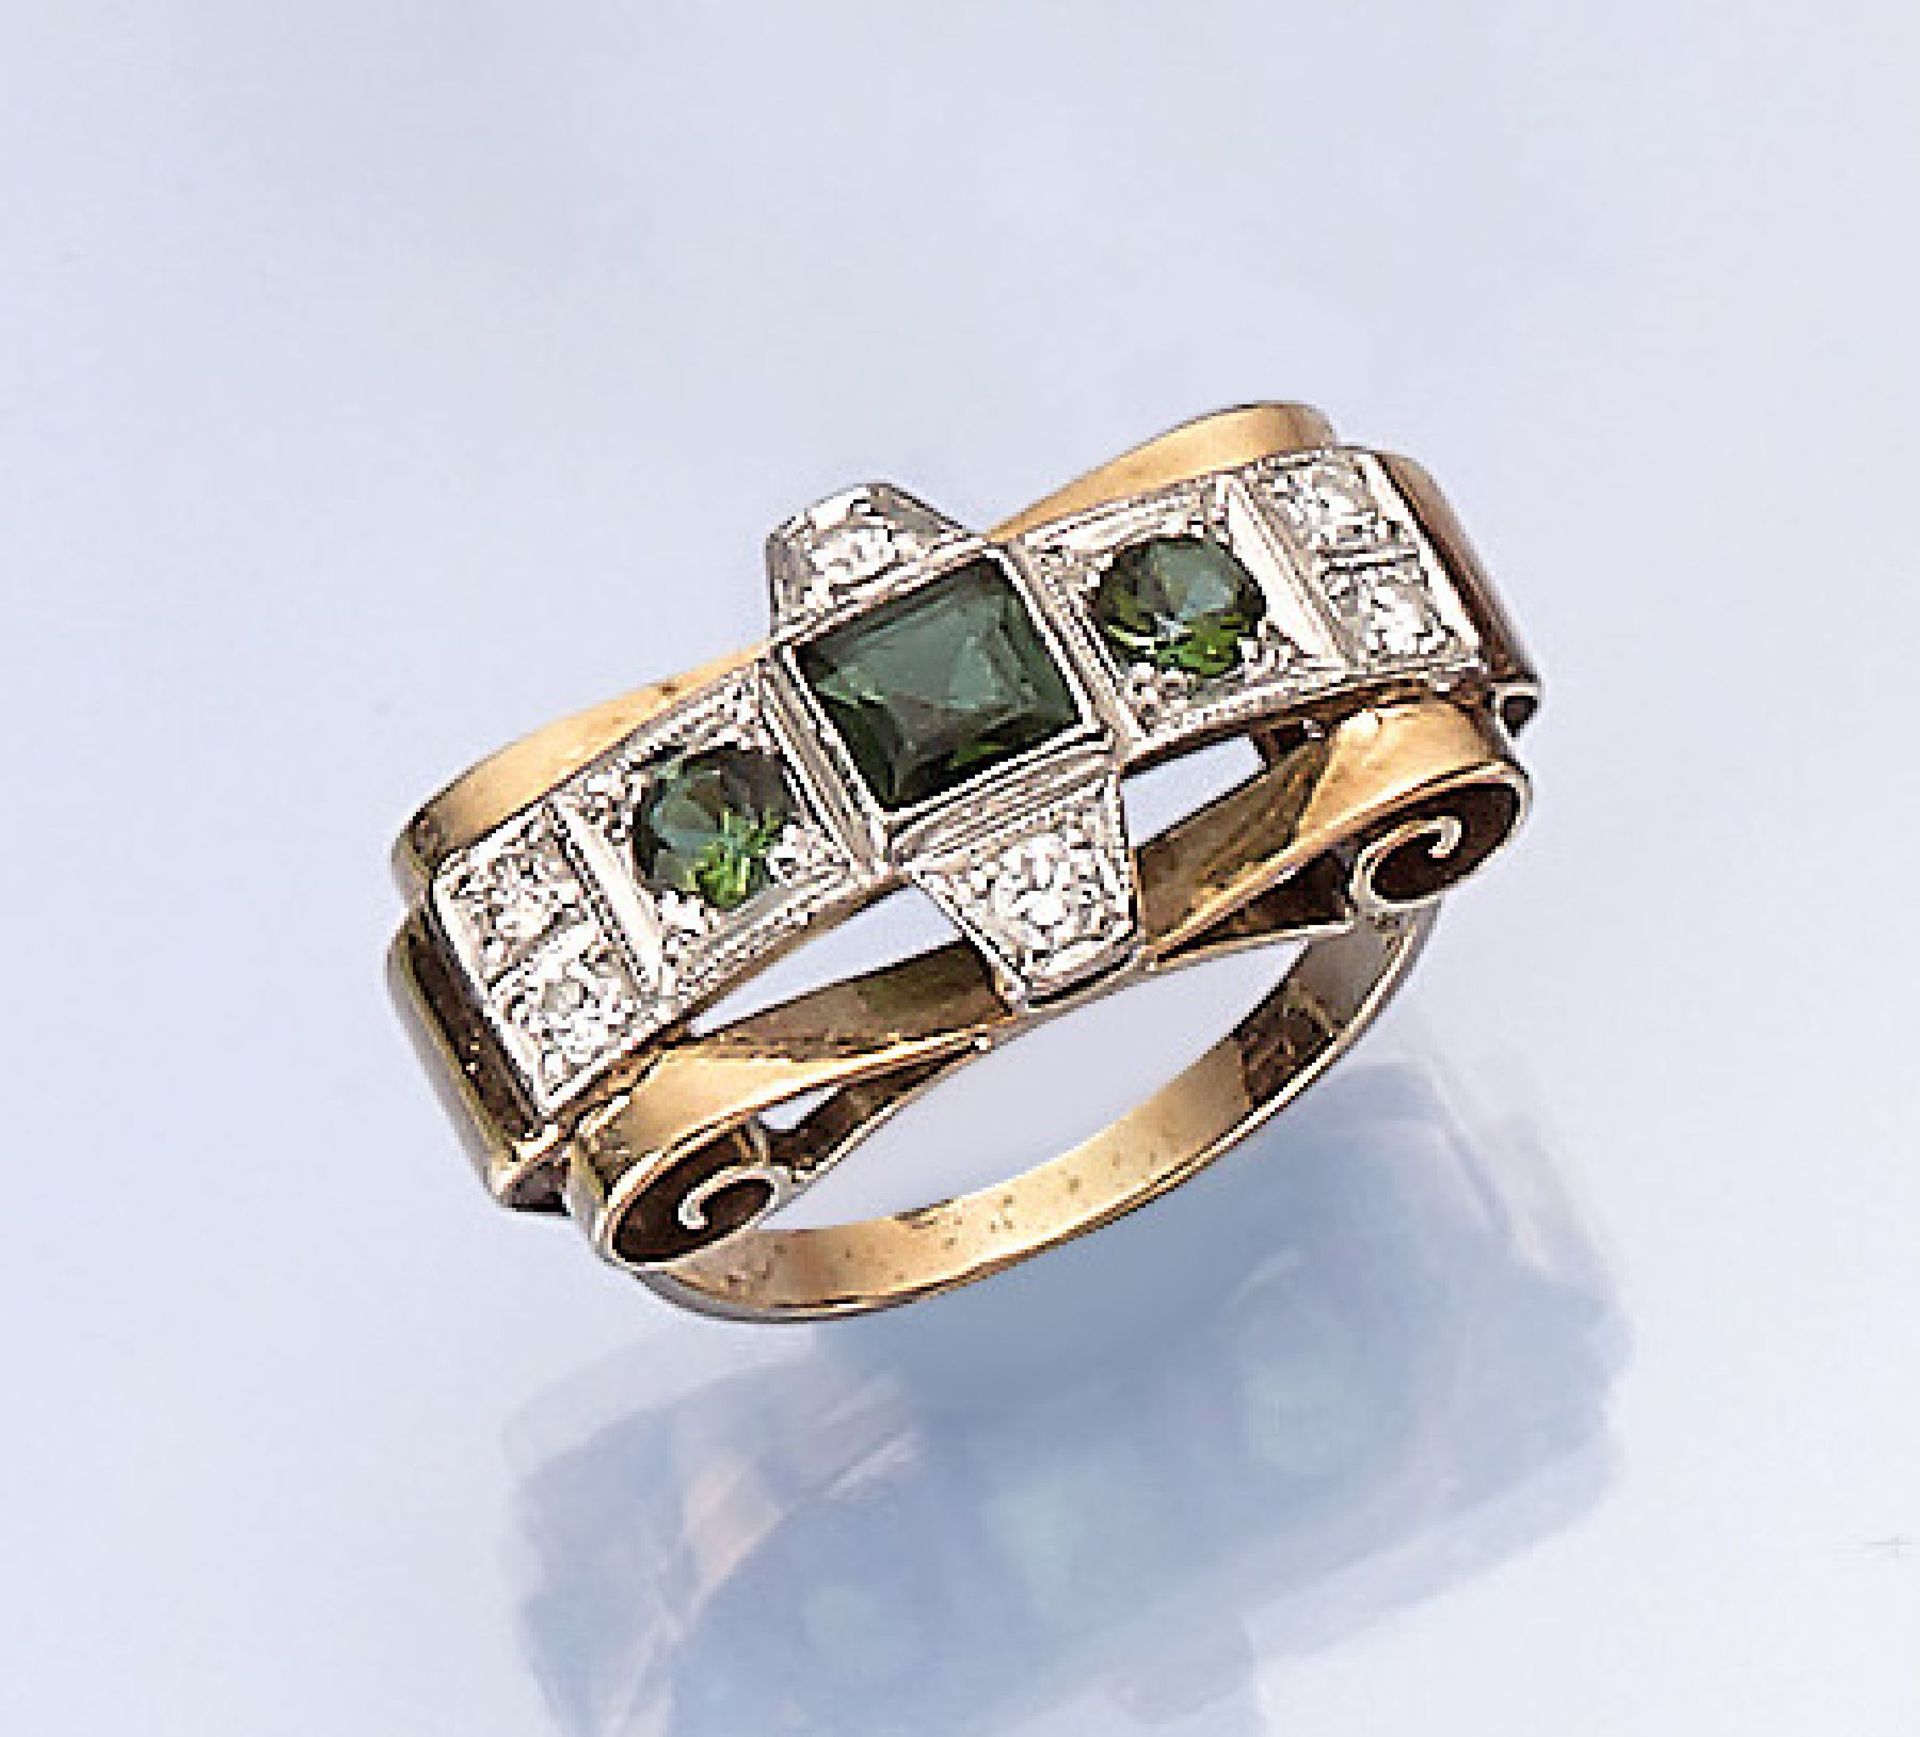 14 kt gold ring with tourmalines and brilliants, german 1940s , YG/WG 585/000, 3 tourmalines of good